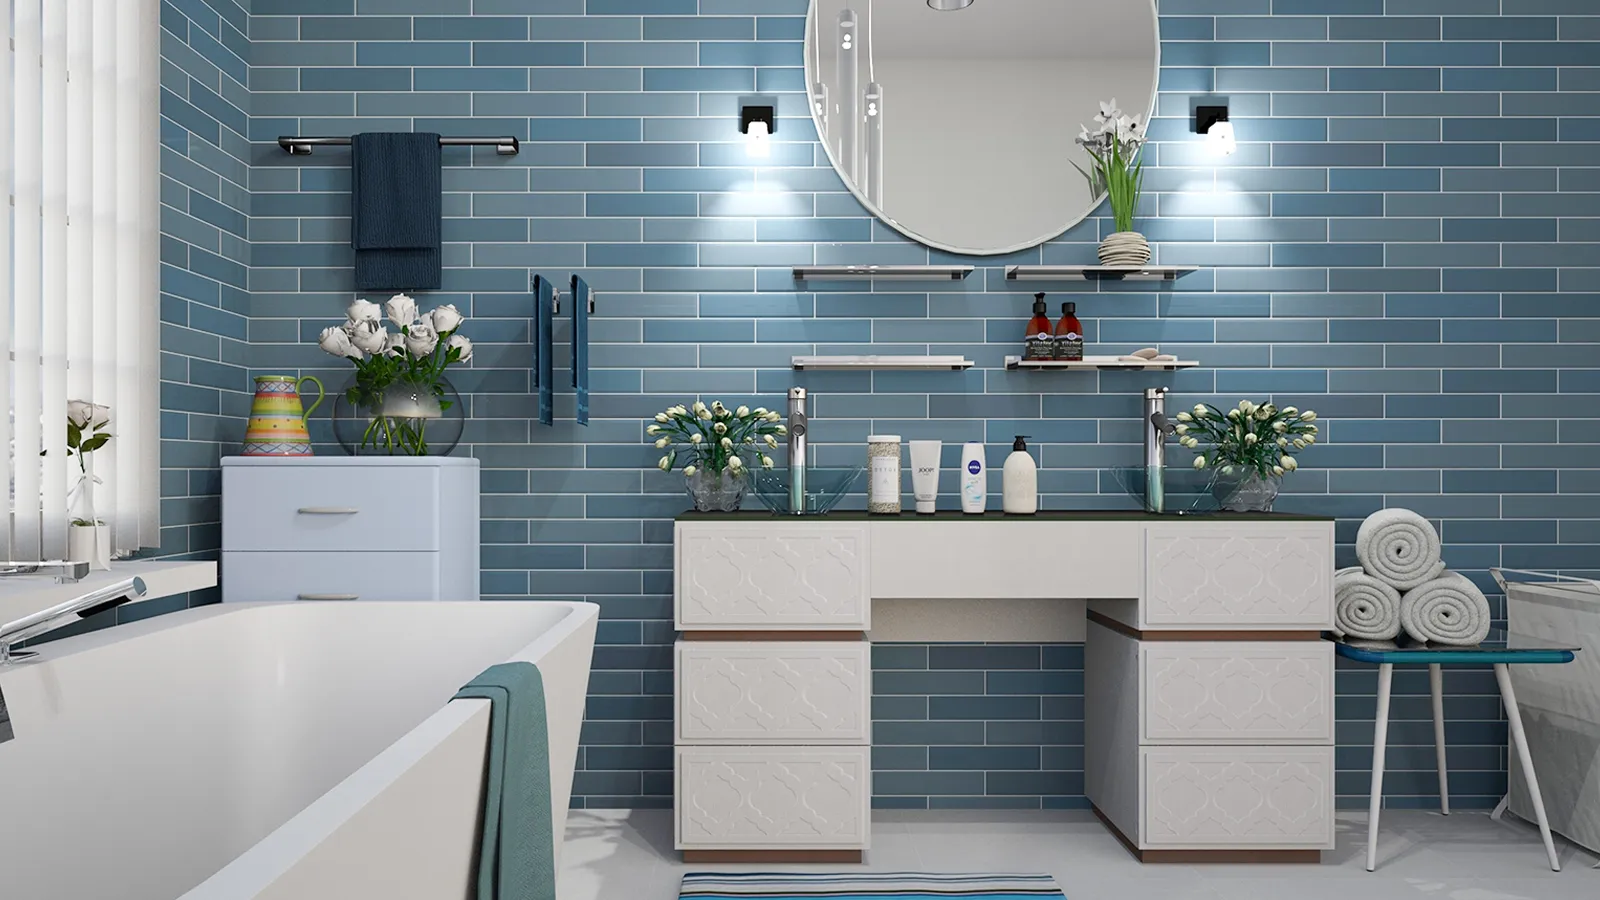 Learn how to decorate an apartment bathroom with blue tiled walls and a white vanity.